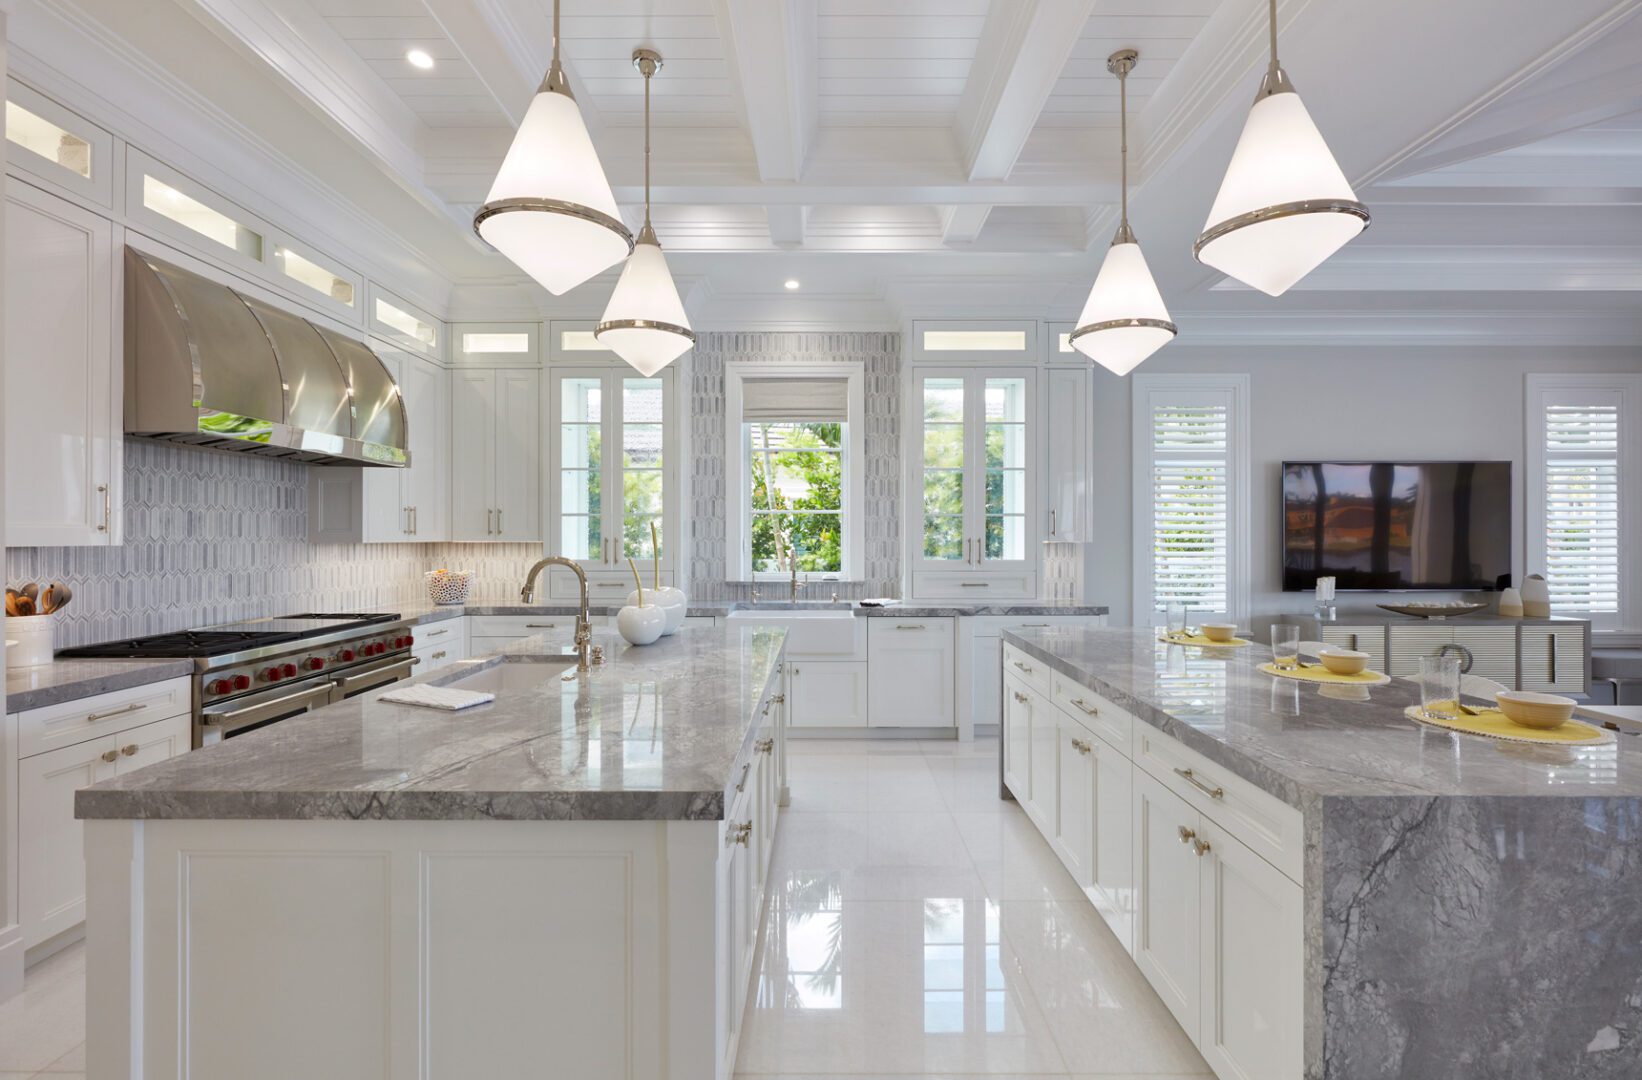 A large kitchen with white cabinets and marble countertops.